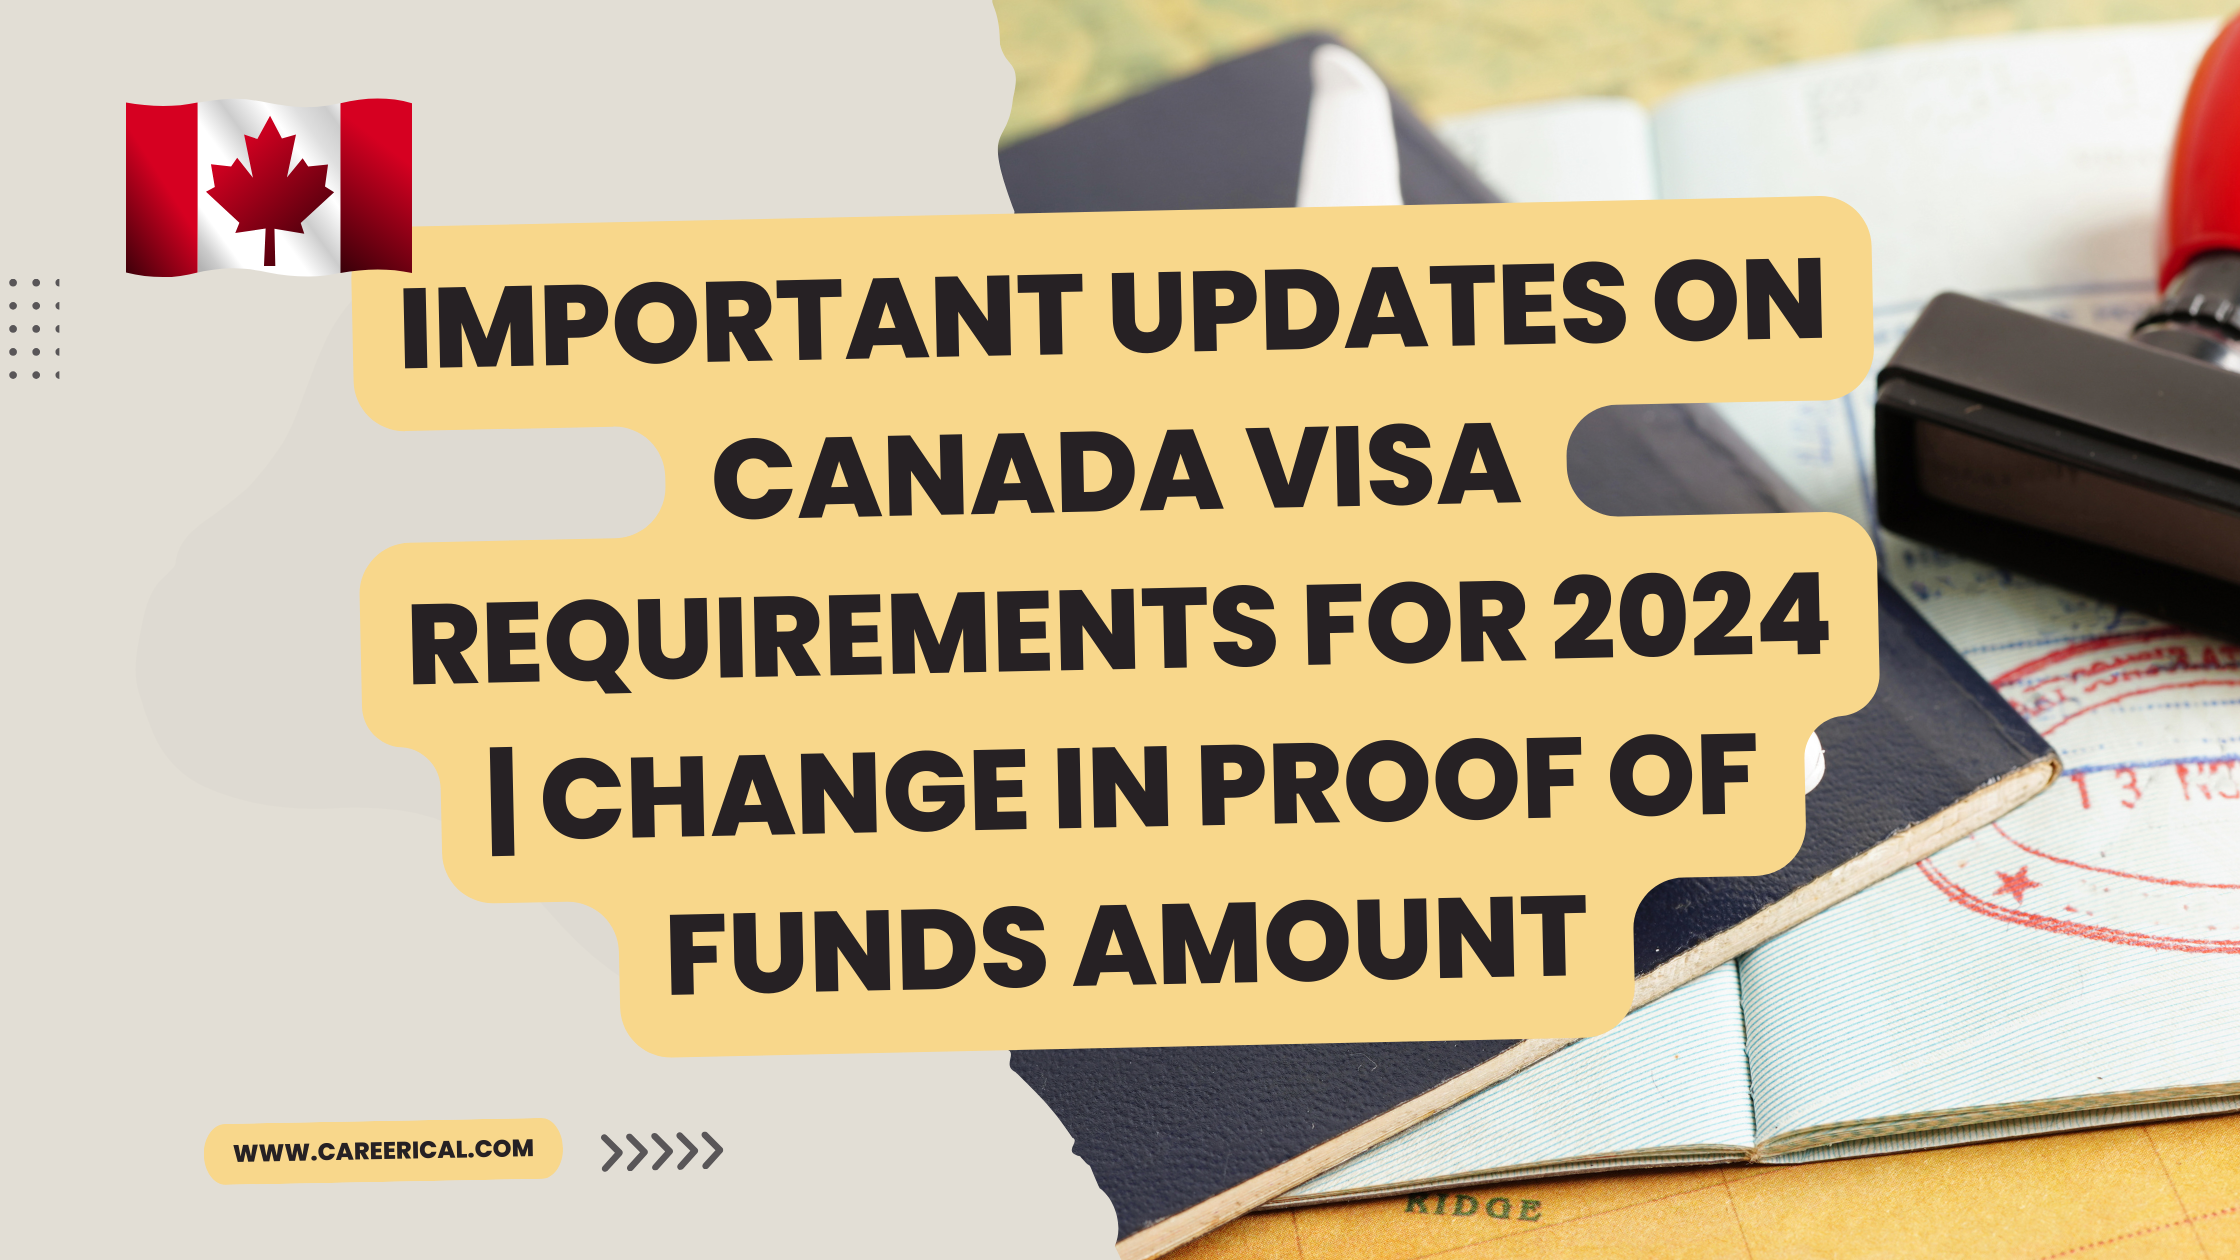 Important Updates on Canada Visa Requirements for 2024 Change in Proof of Funds Amount